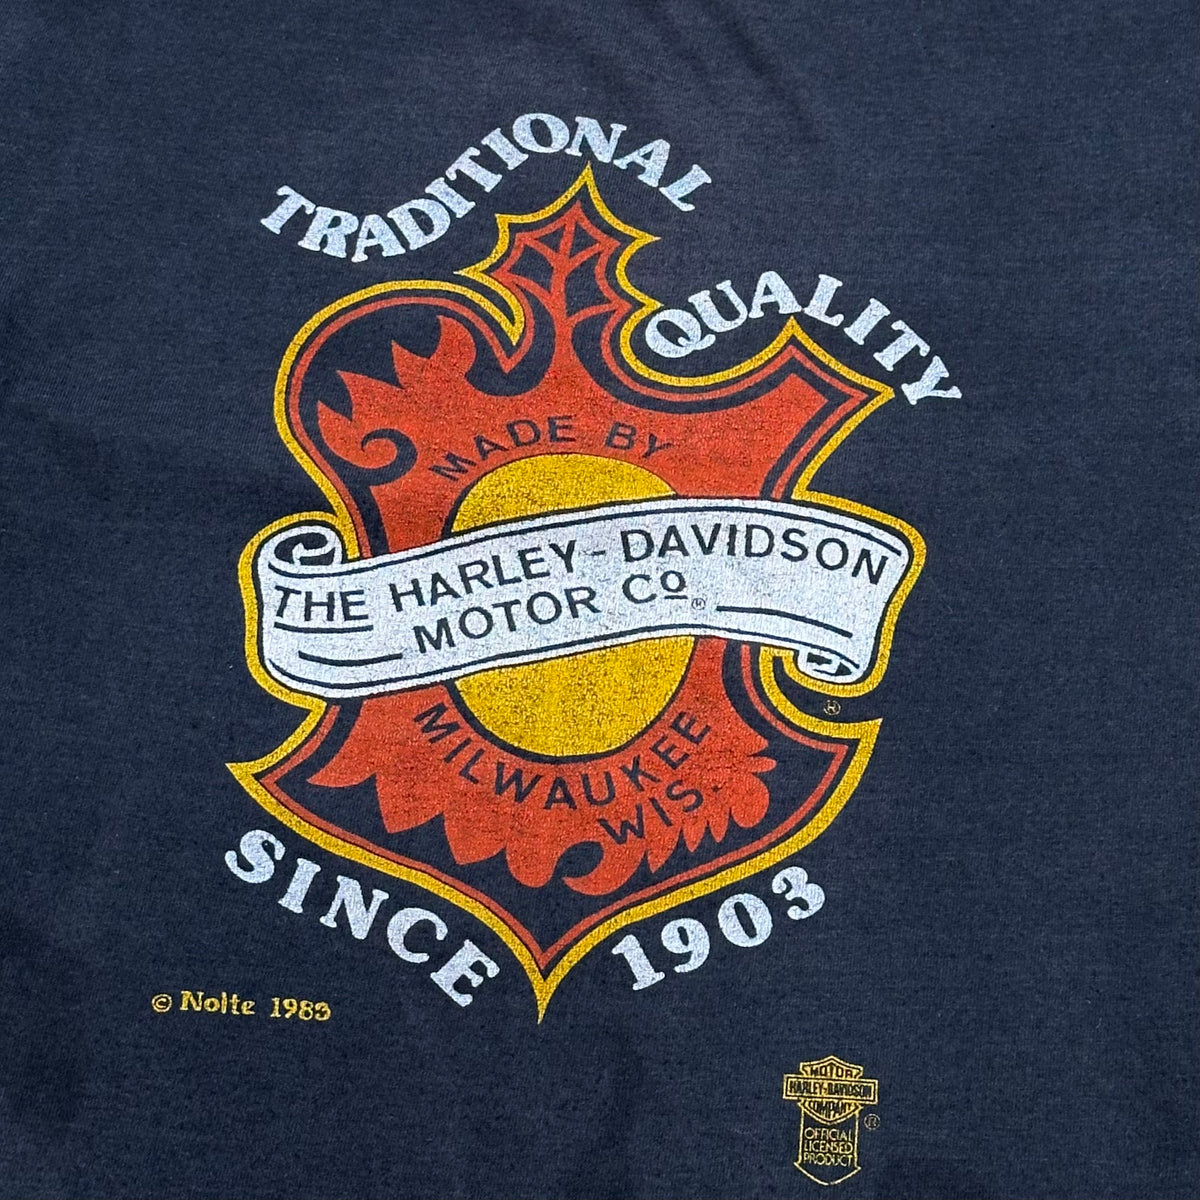 VTG 1983 Harley Davidson Motorcycles T-Shirt Milwaukee Wiss. Made in Canada